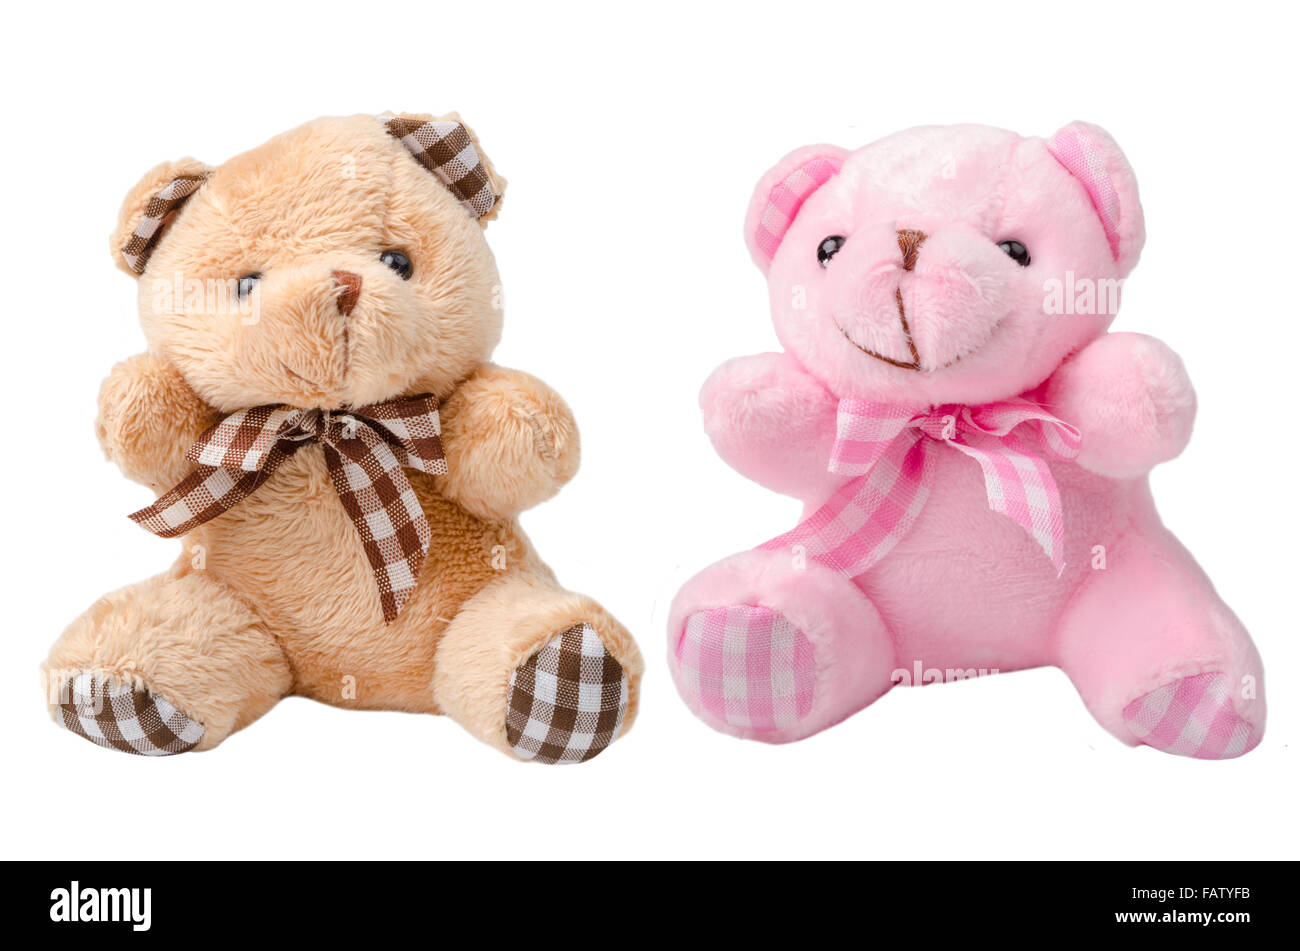 Toy teddy bear and pink bear on white backgrounhd. Stock Photo